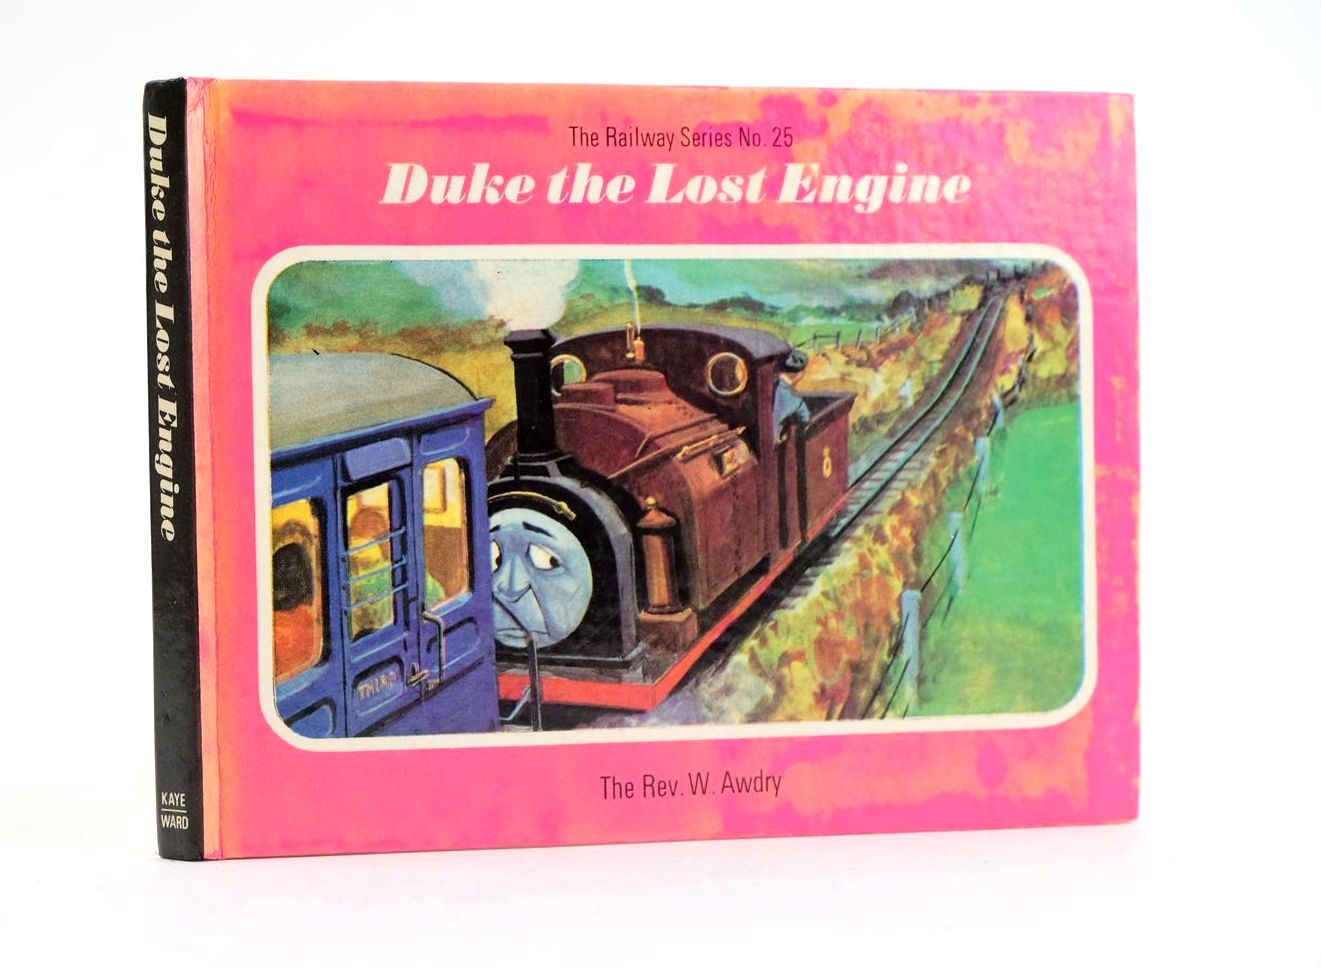 Photo of DUKE THE LOST ENGINE written by Awdry, Rev. W. illustrated by Edwards, Gunvor Edwards, Peter published by Kaye &amp; Ward Ltd. (STOCK CODE: 1323440)  for sale by Stella & Rose's Books